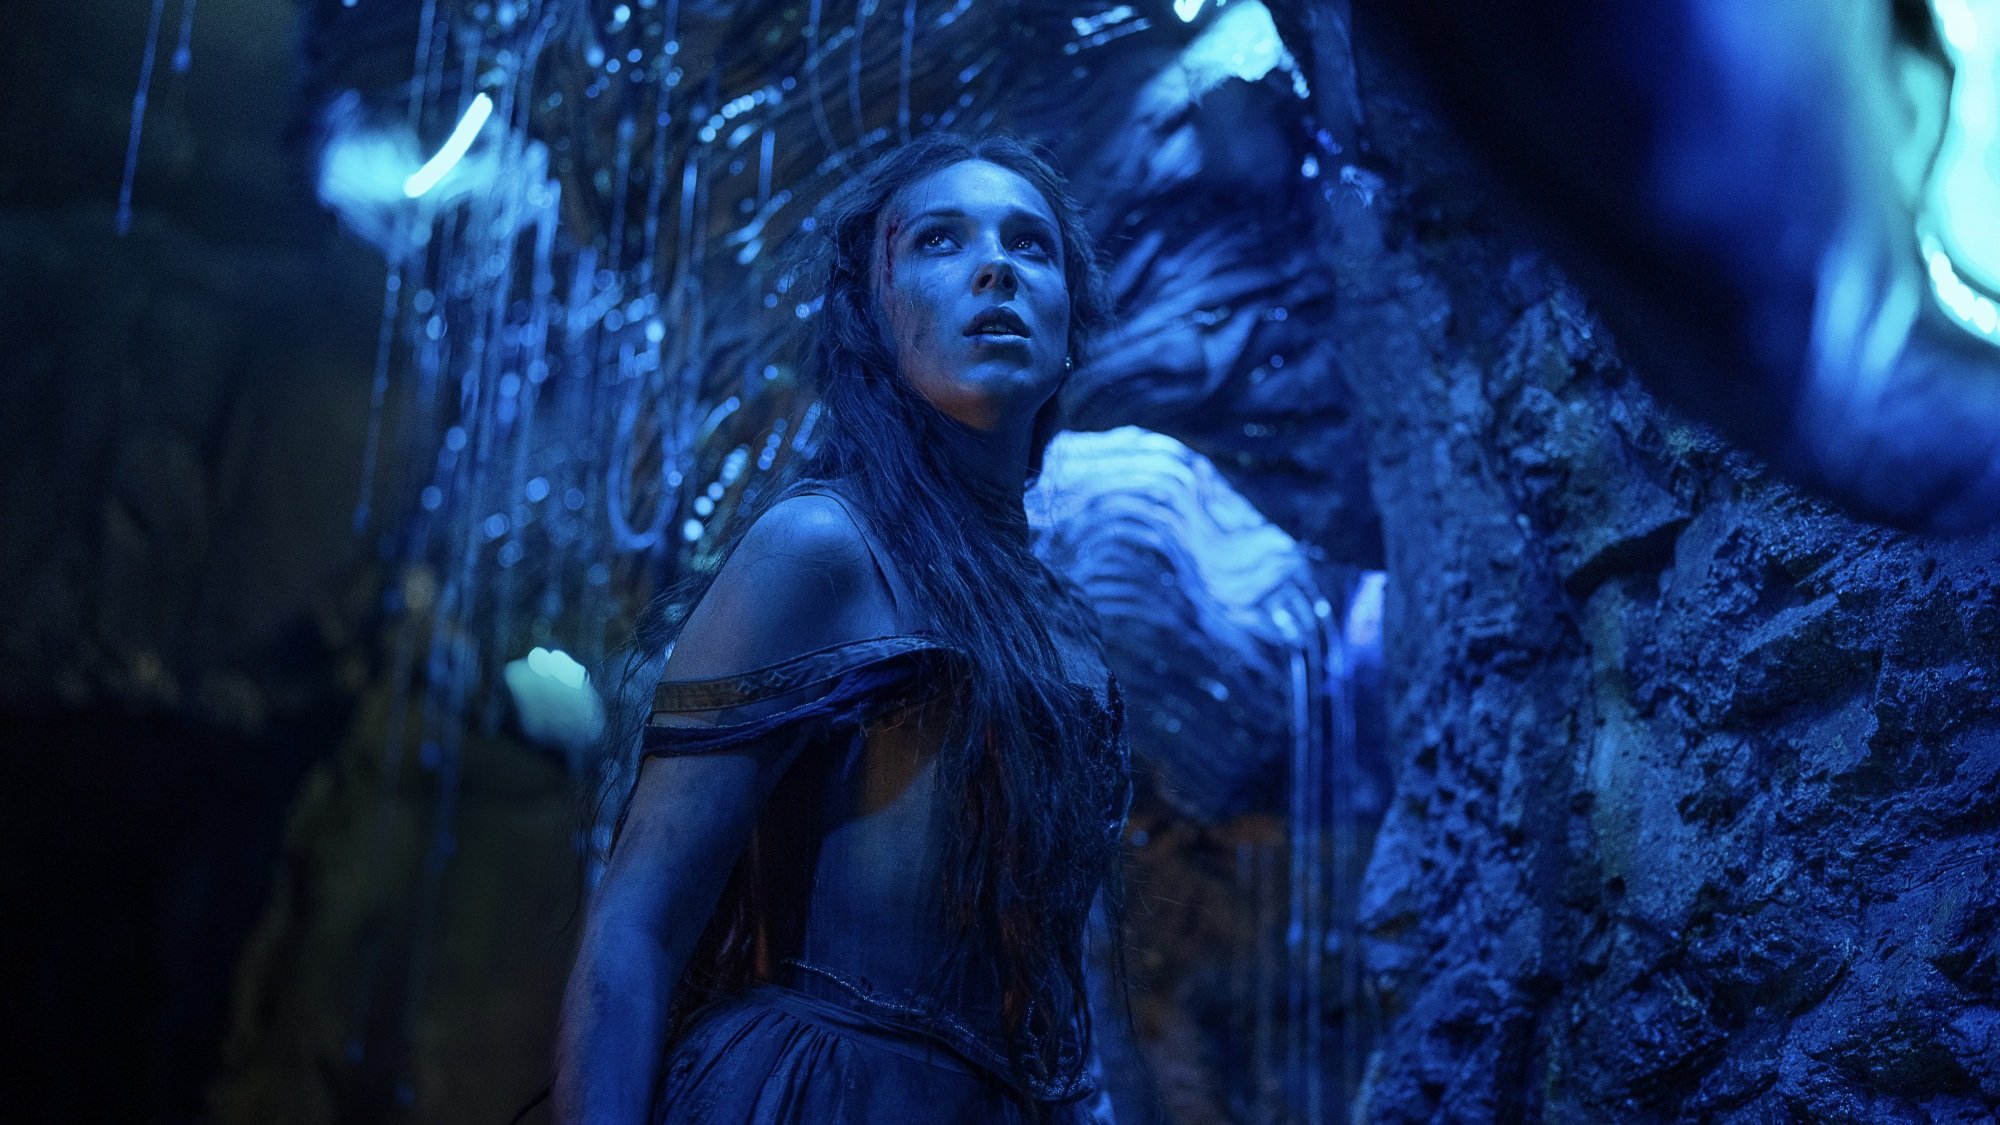 A young woman stands in a cave lit blue by glowworms.